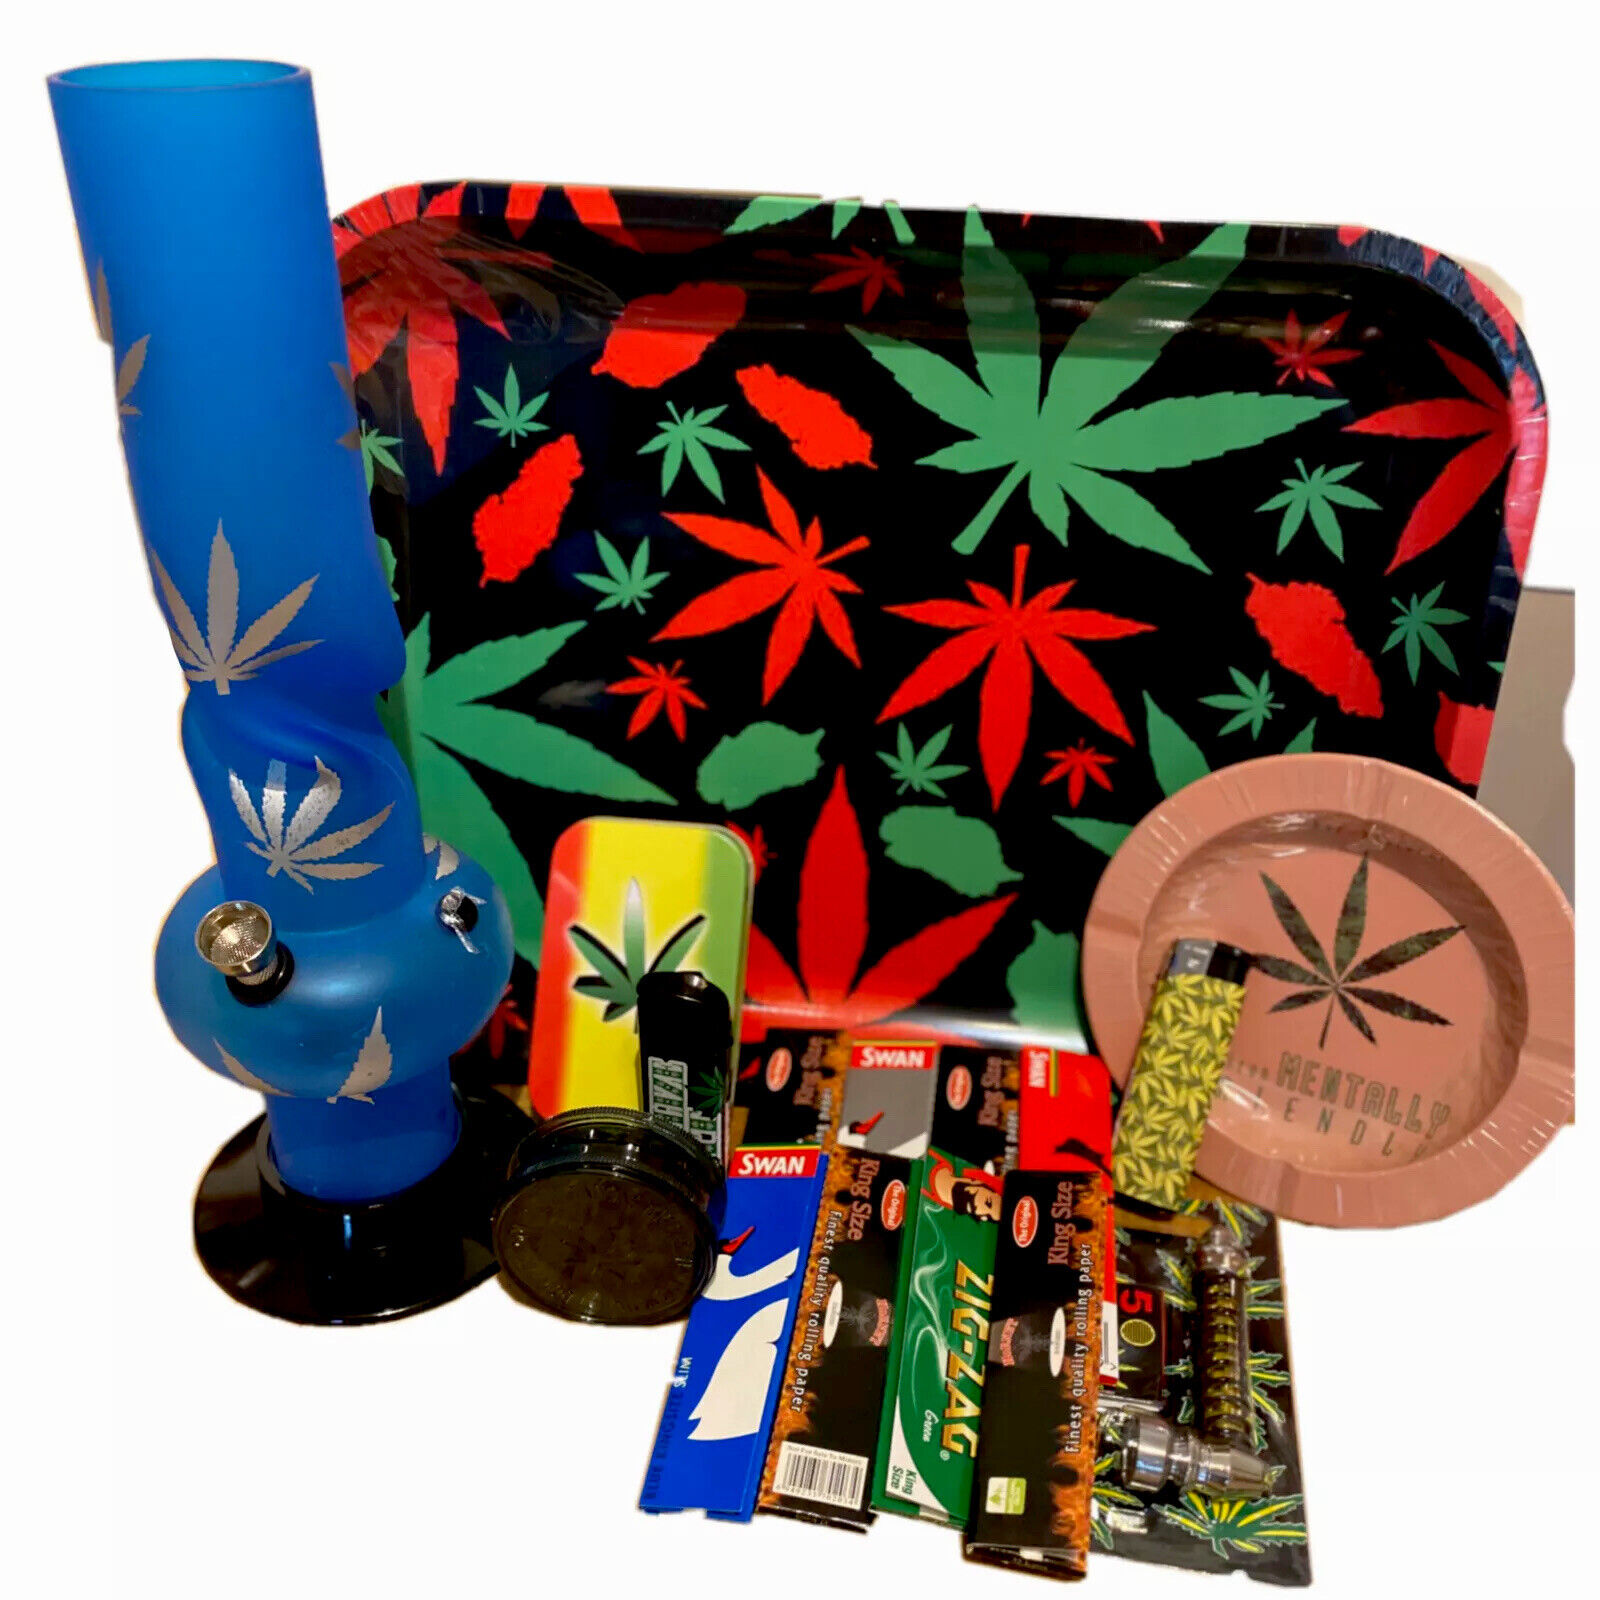 THE DEVILS BRAND COMPLETE SMOKING GIFT SET INC 12” WATERPIPE